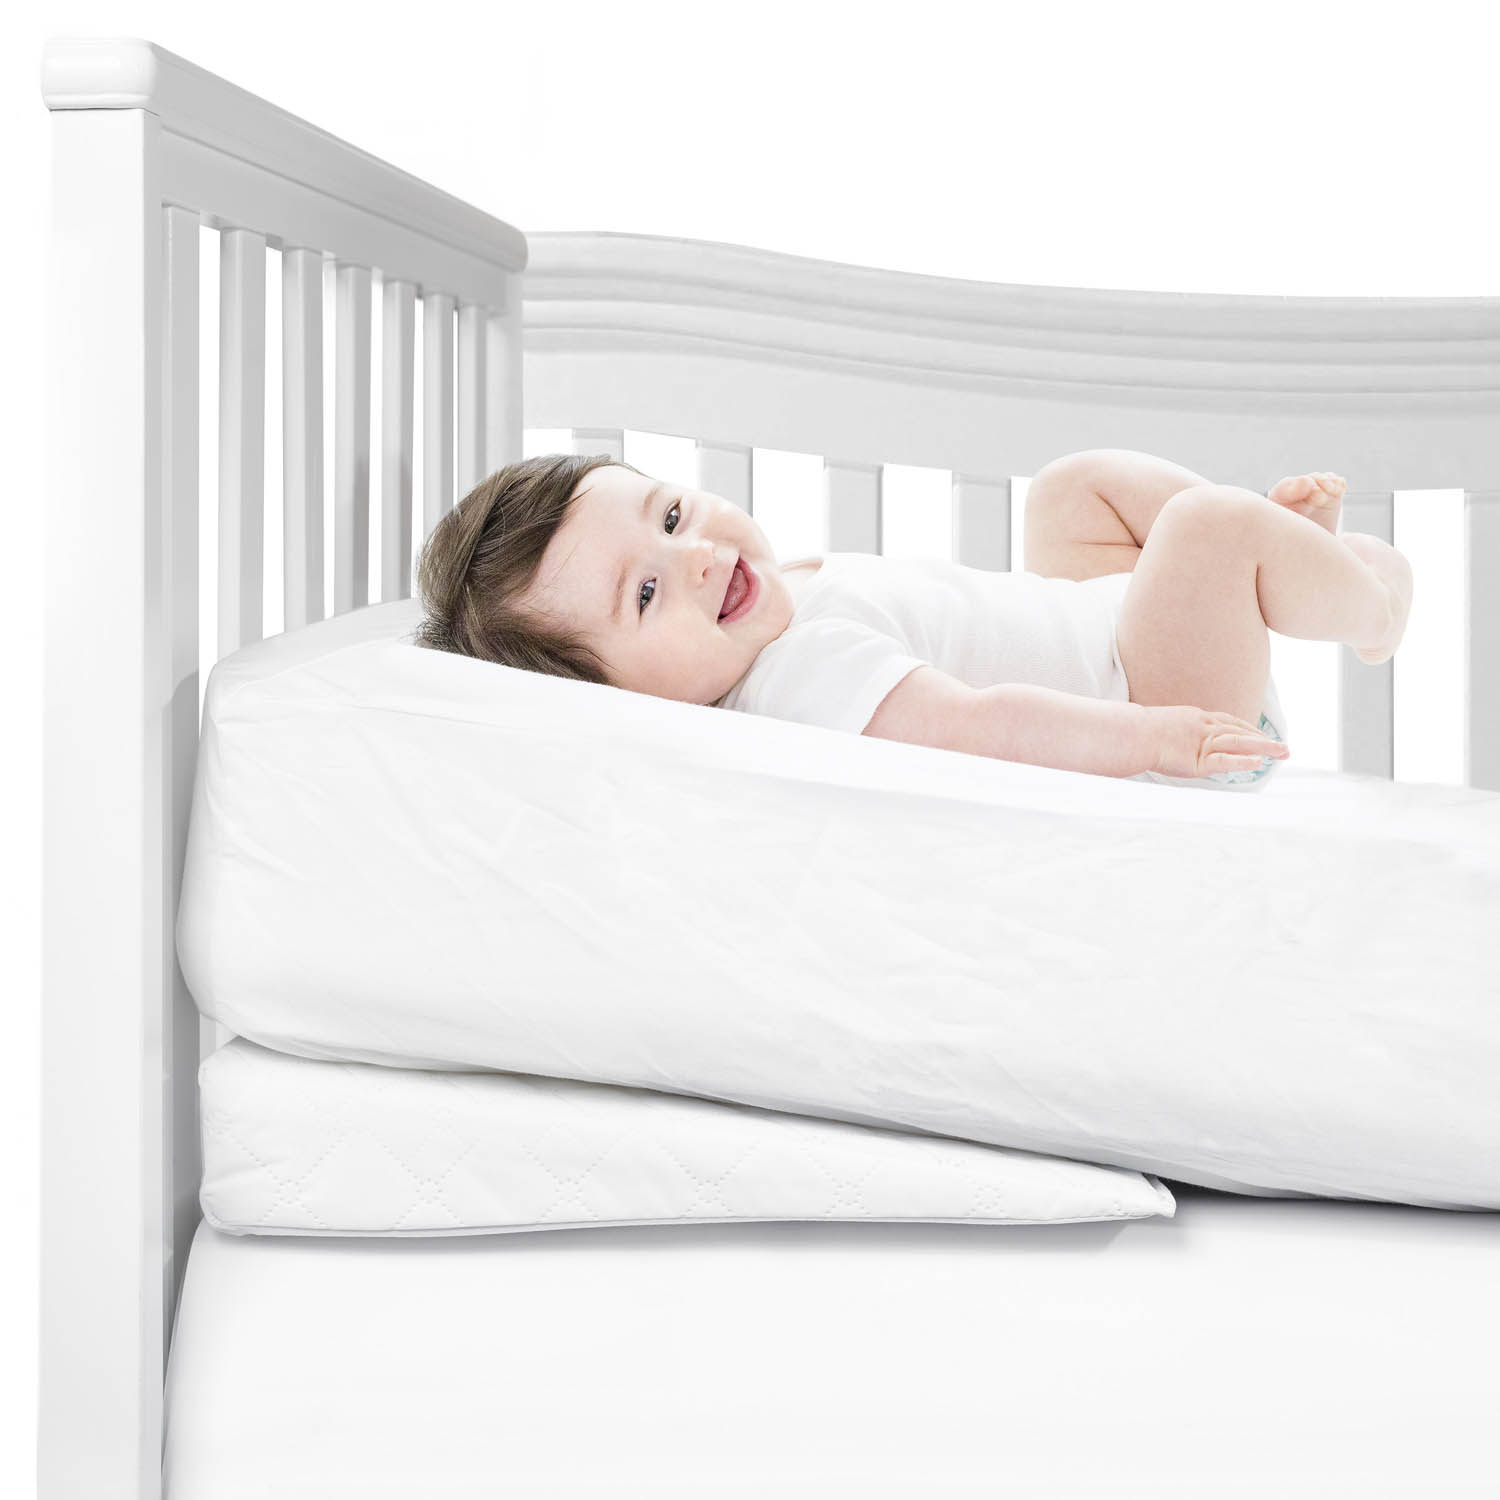 When to use a cradle bed sleeping wedge - after speaking with a pediatrician